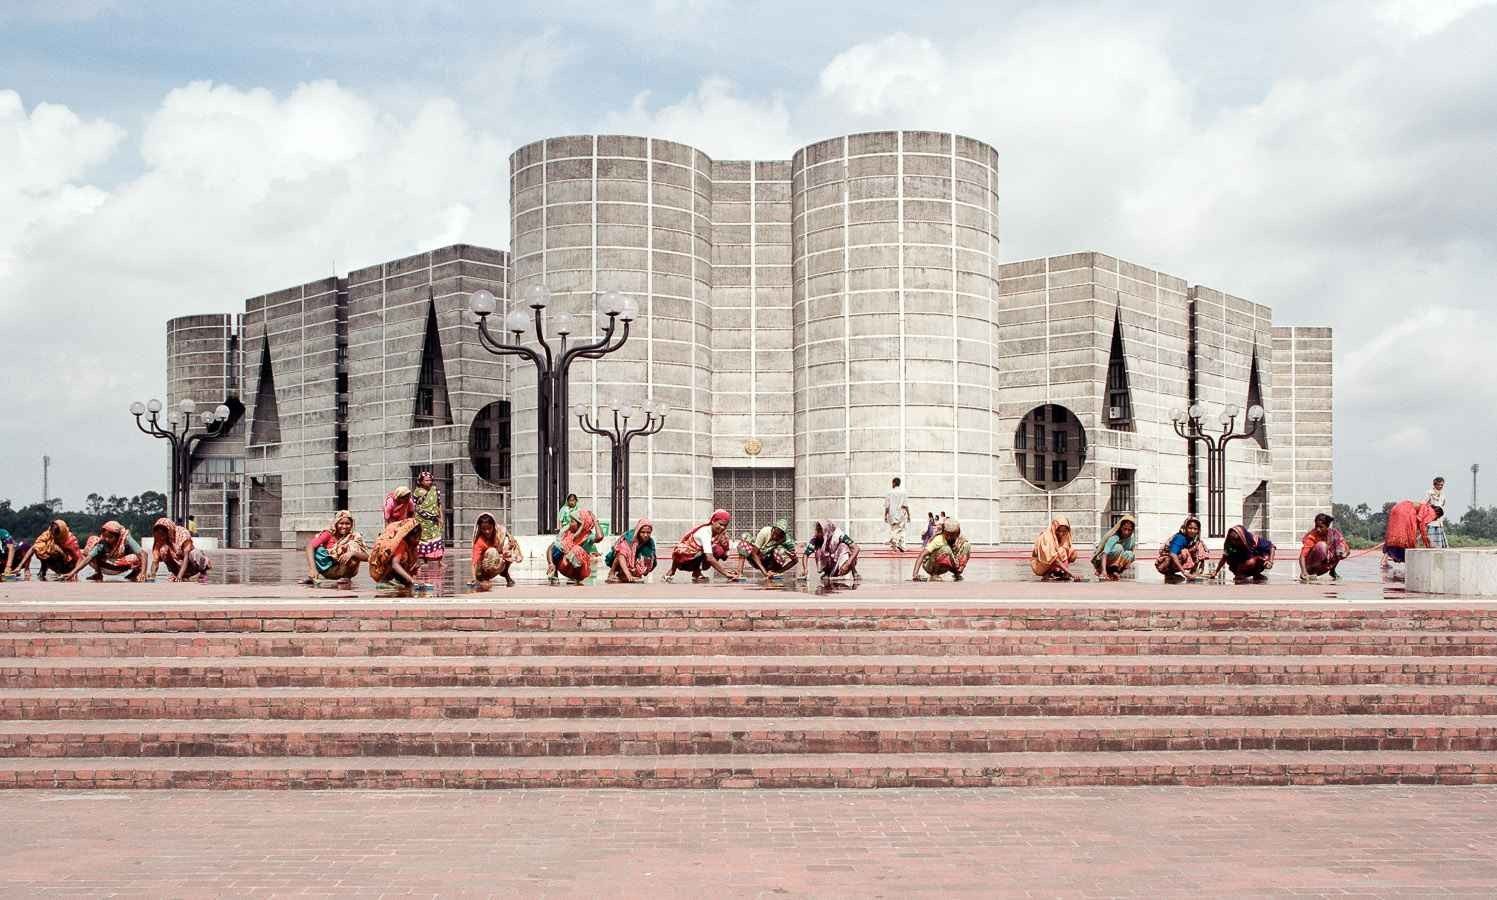 National Assembly Building - The National Assembly Building of Bangladesh